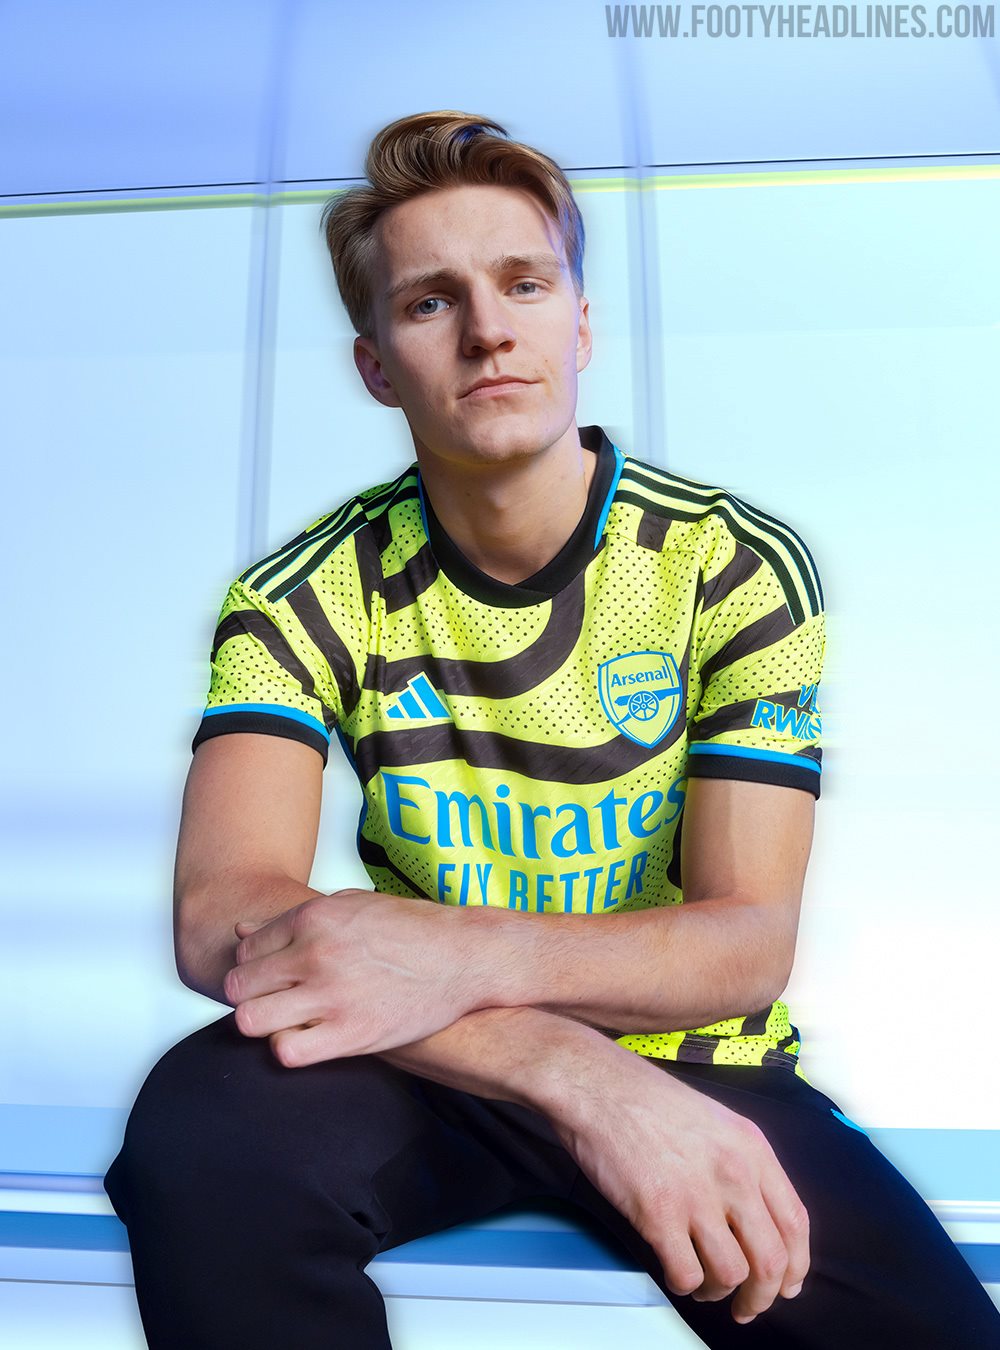 Arsenal unveil new black and gold 22-23 away kit in tribute to 'Little  Islingtons' around the world